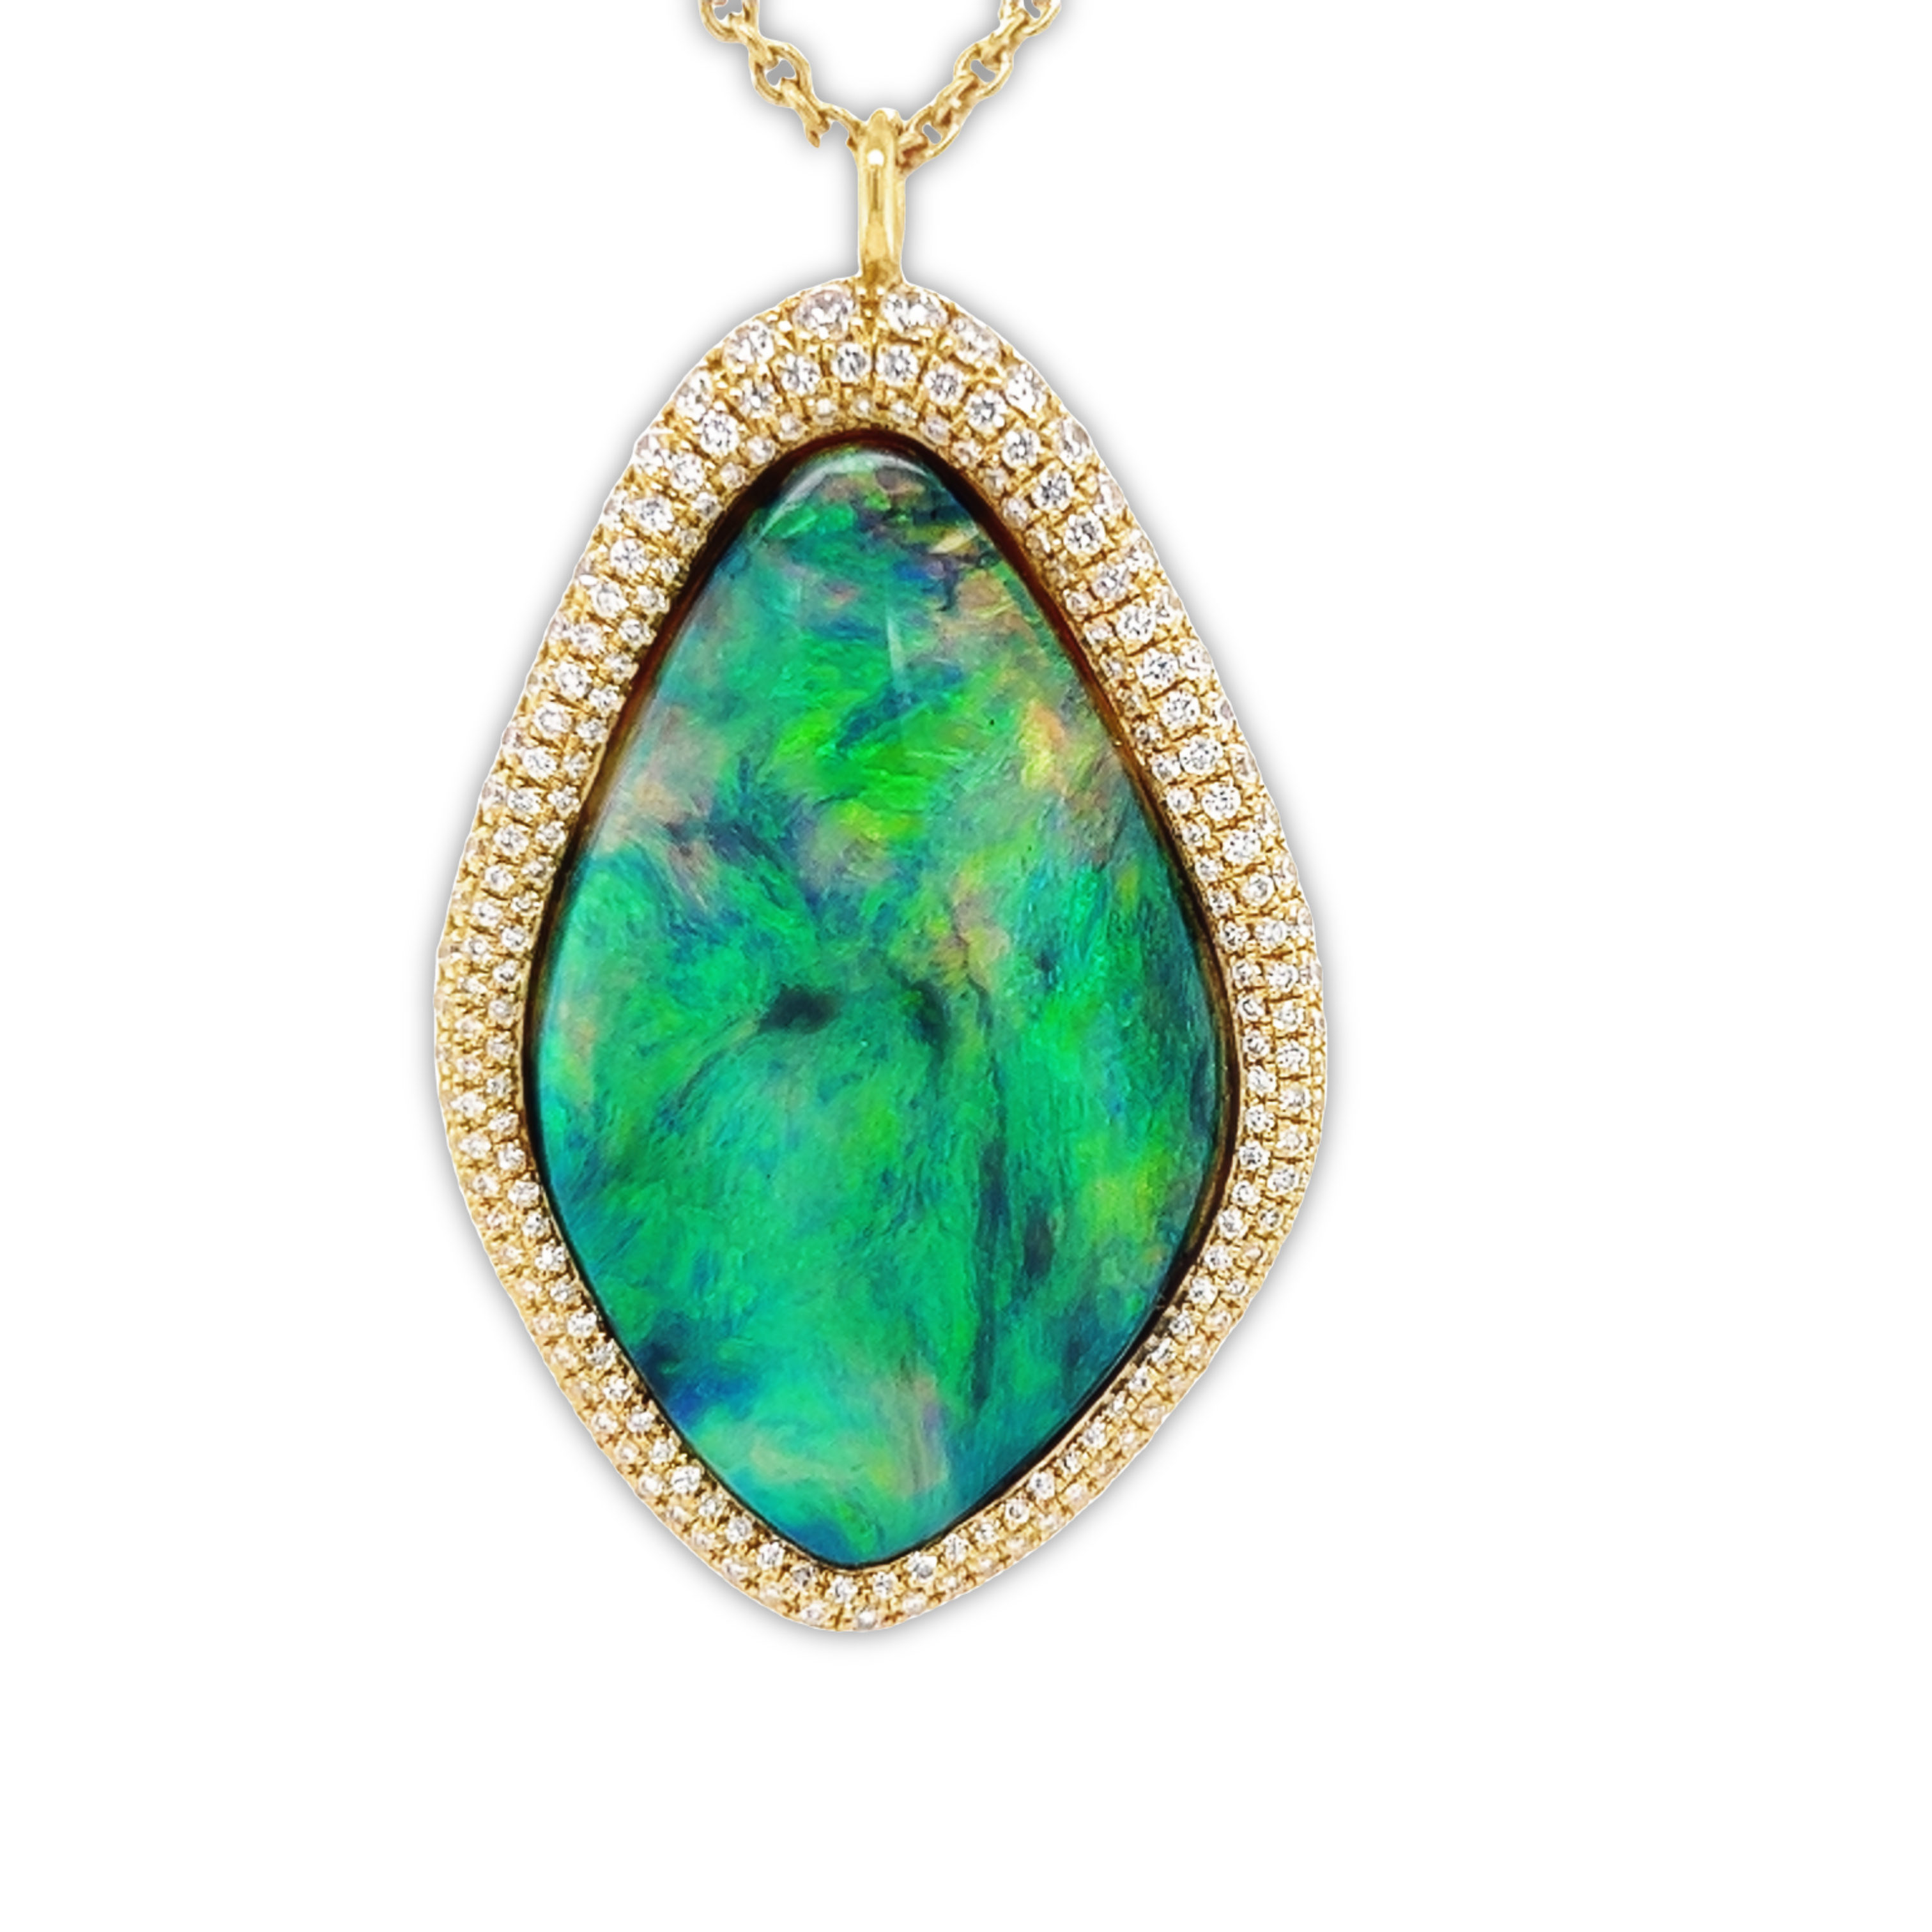 Featured image for “Stunning Peacock Feather Opal”